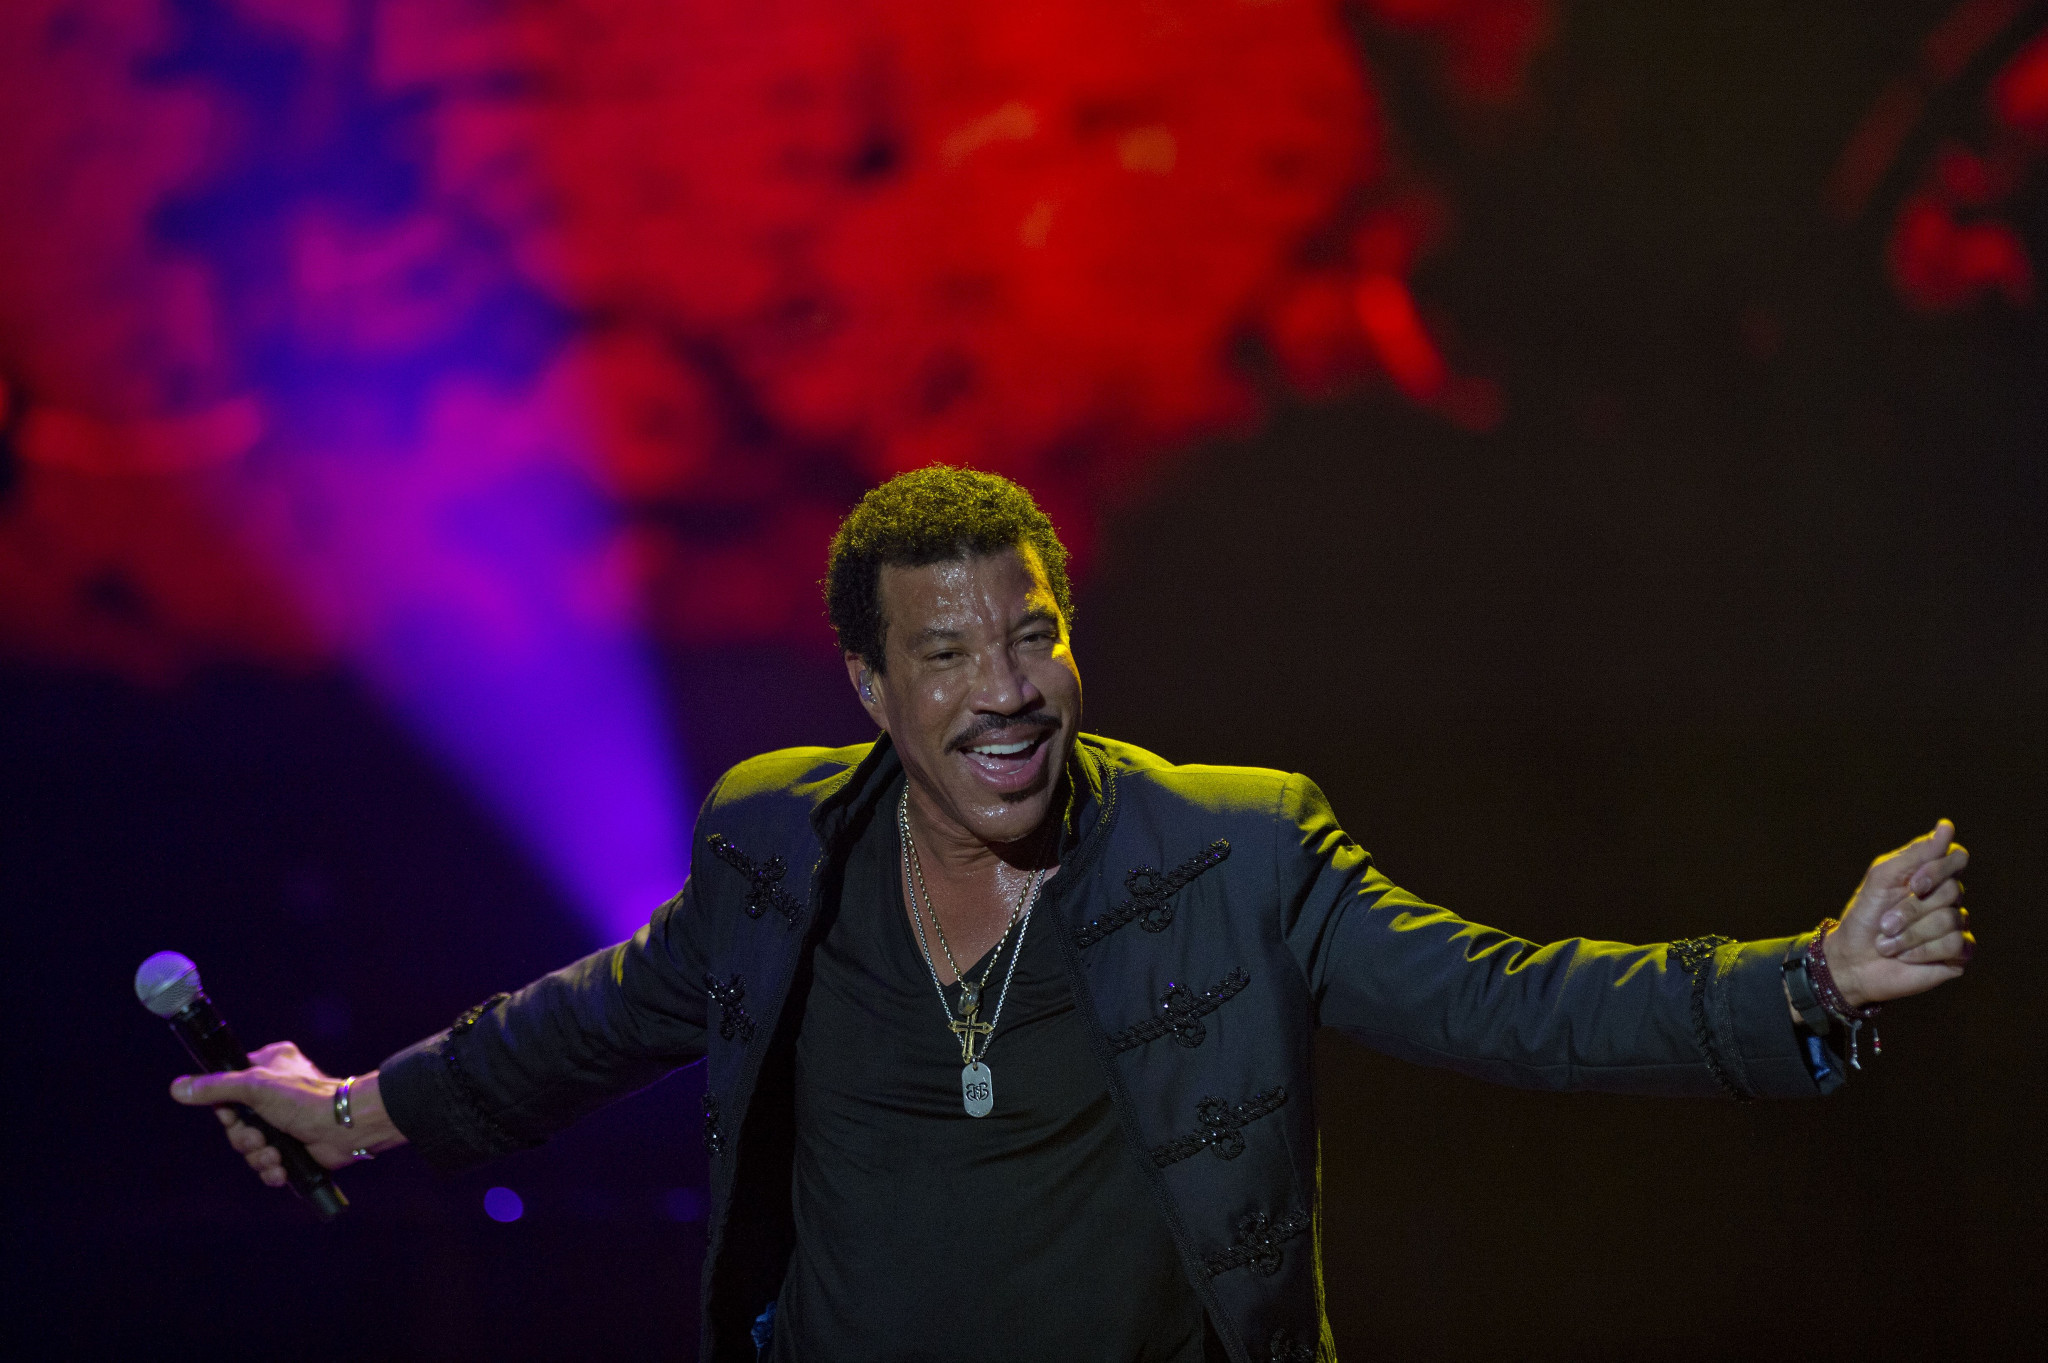 Lionel Richie, who is from Alabama, is scheduled to headline the Birmingham 2022 Closing Ceremony ©Getty Images